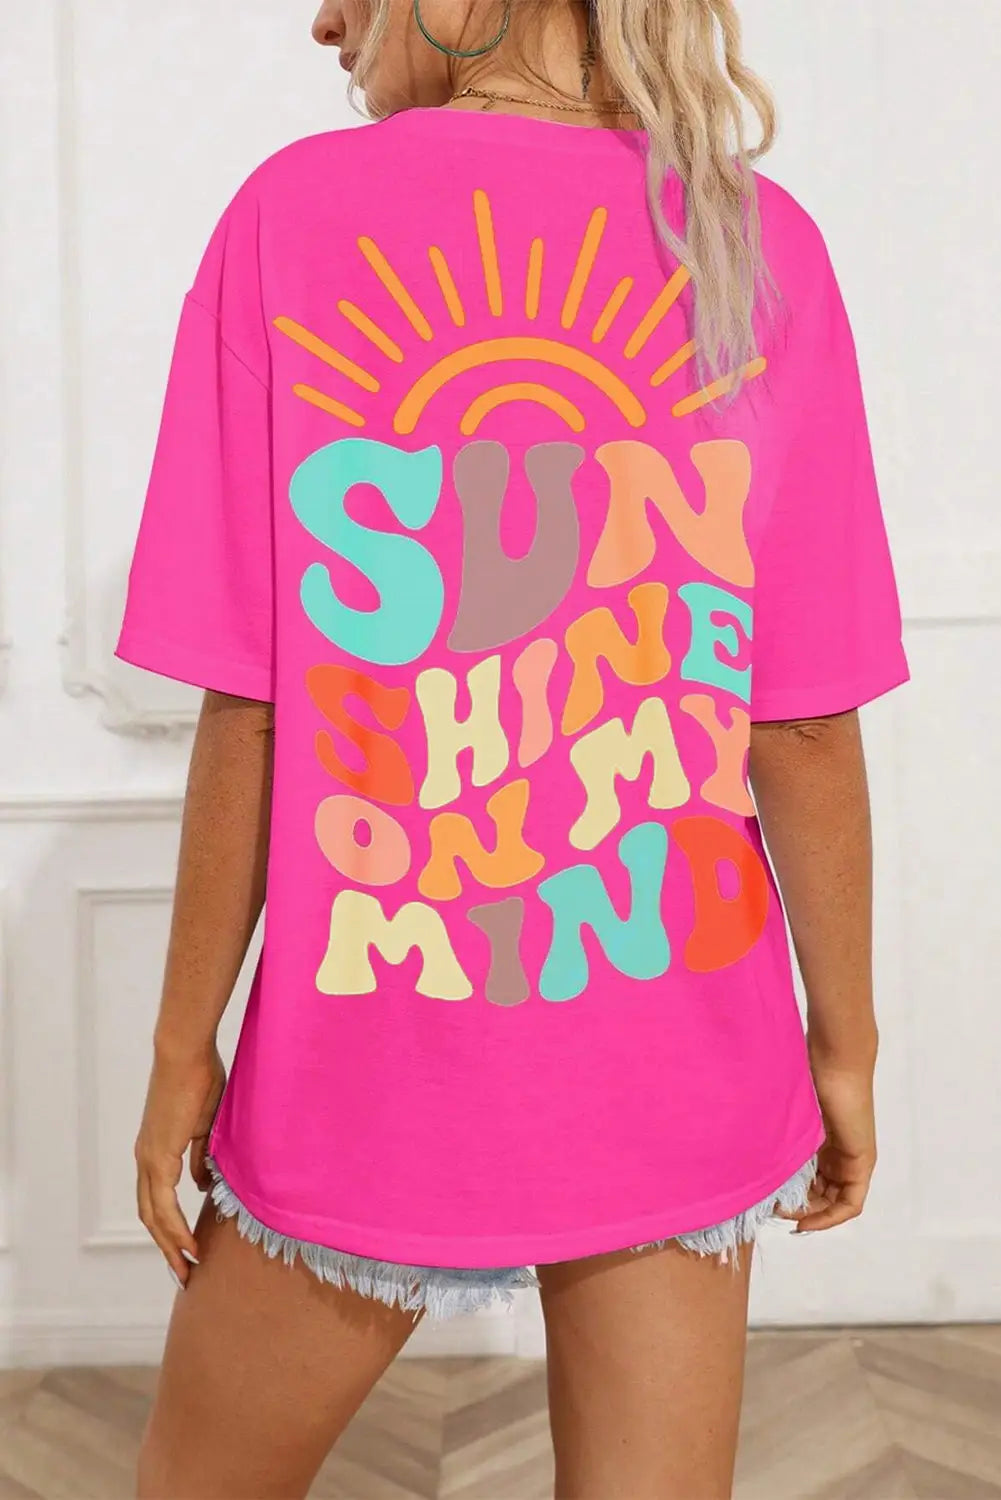 Bright pink sunshine on my mind graphic tee - s / 95% cotton + 5% polyester - tops